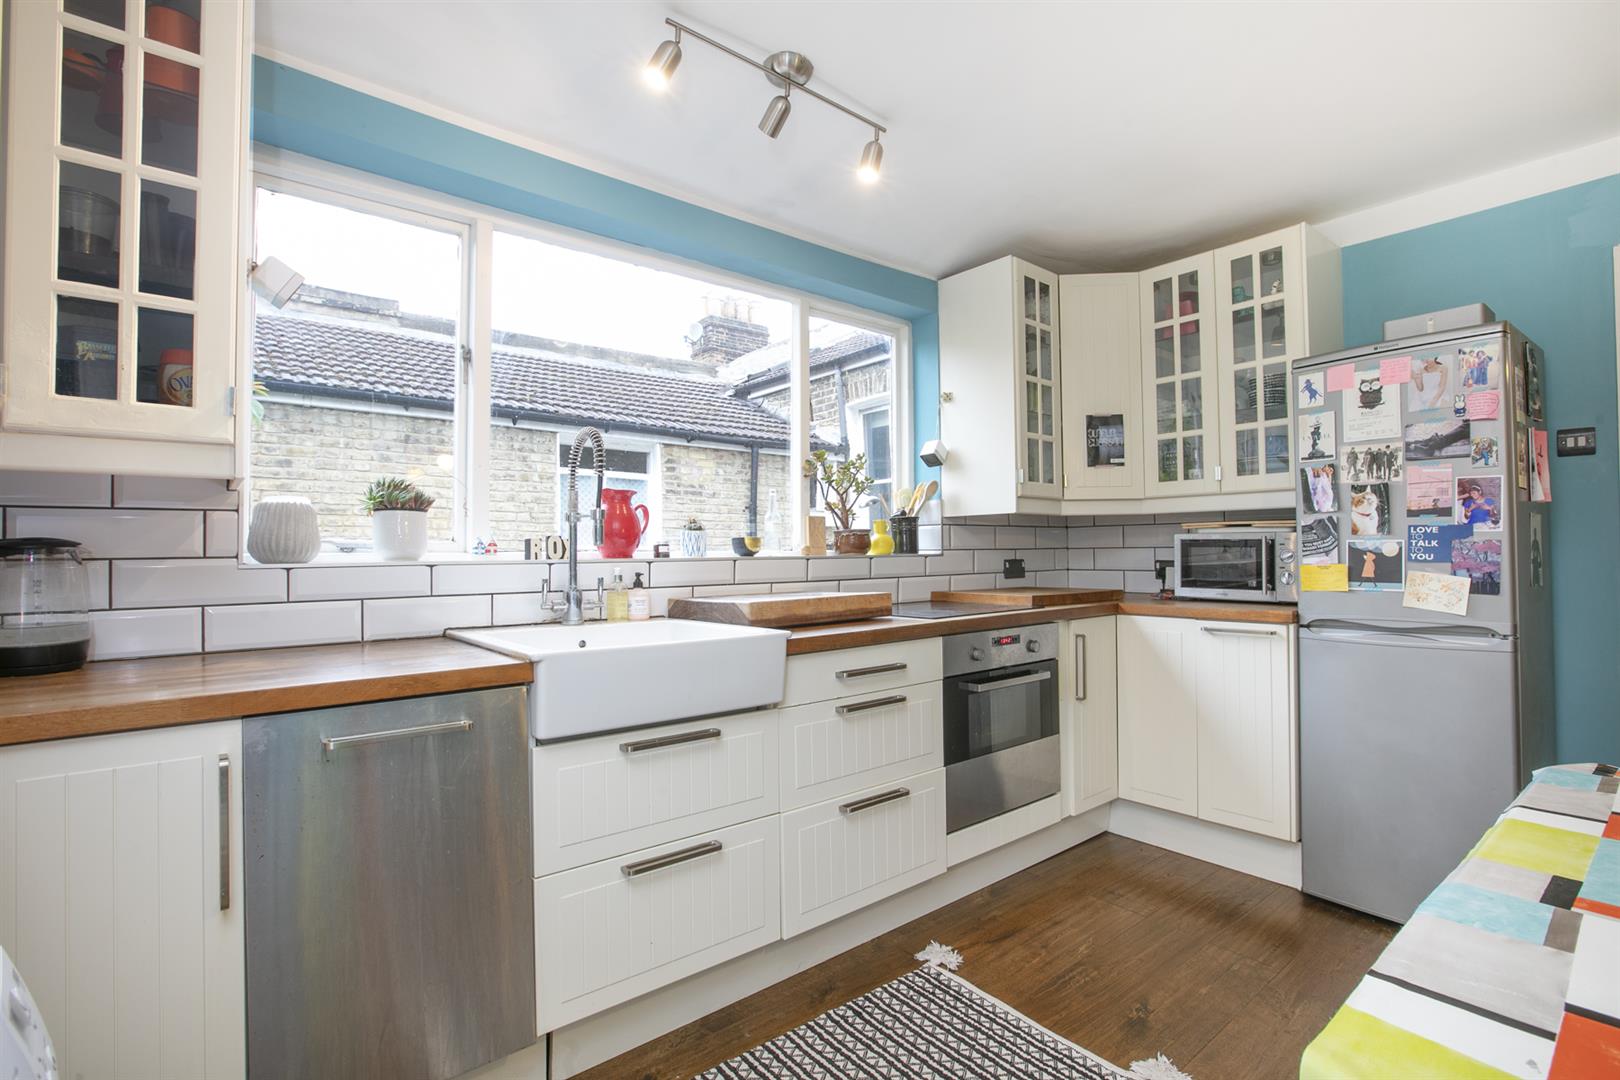 Flat - Conversion For Sale in Gairloch Road, Camberwell, SE5 956 view5